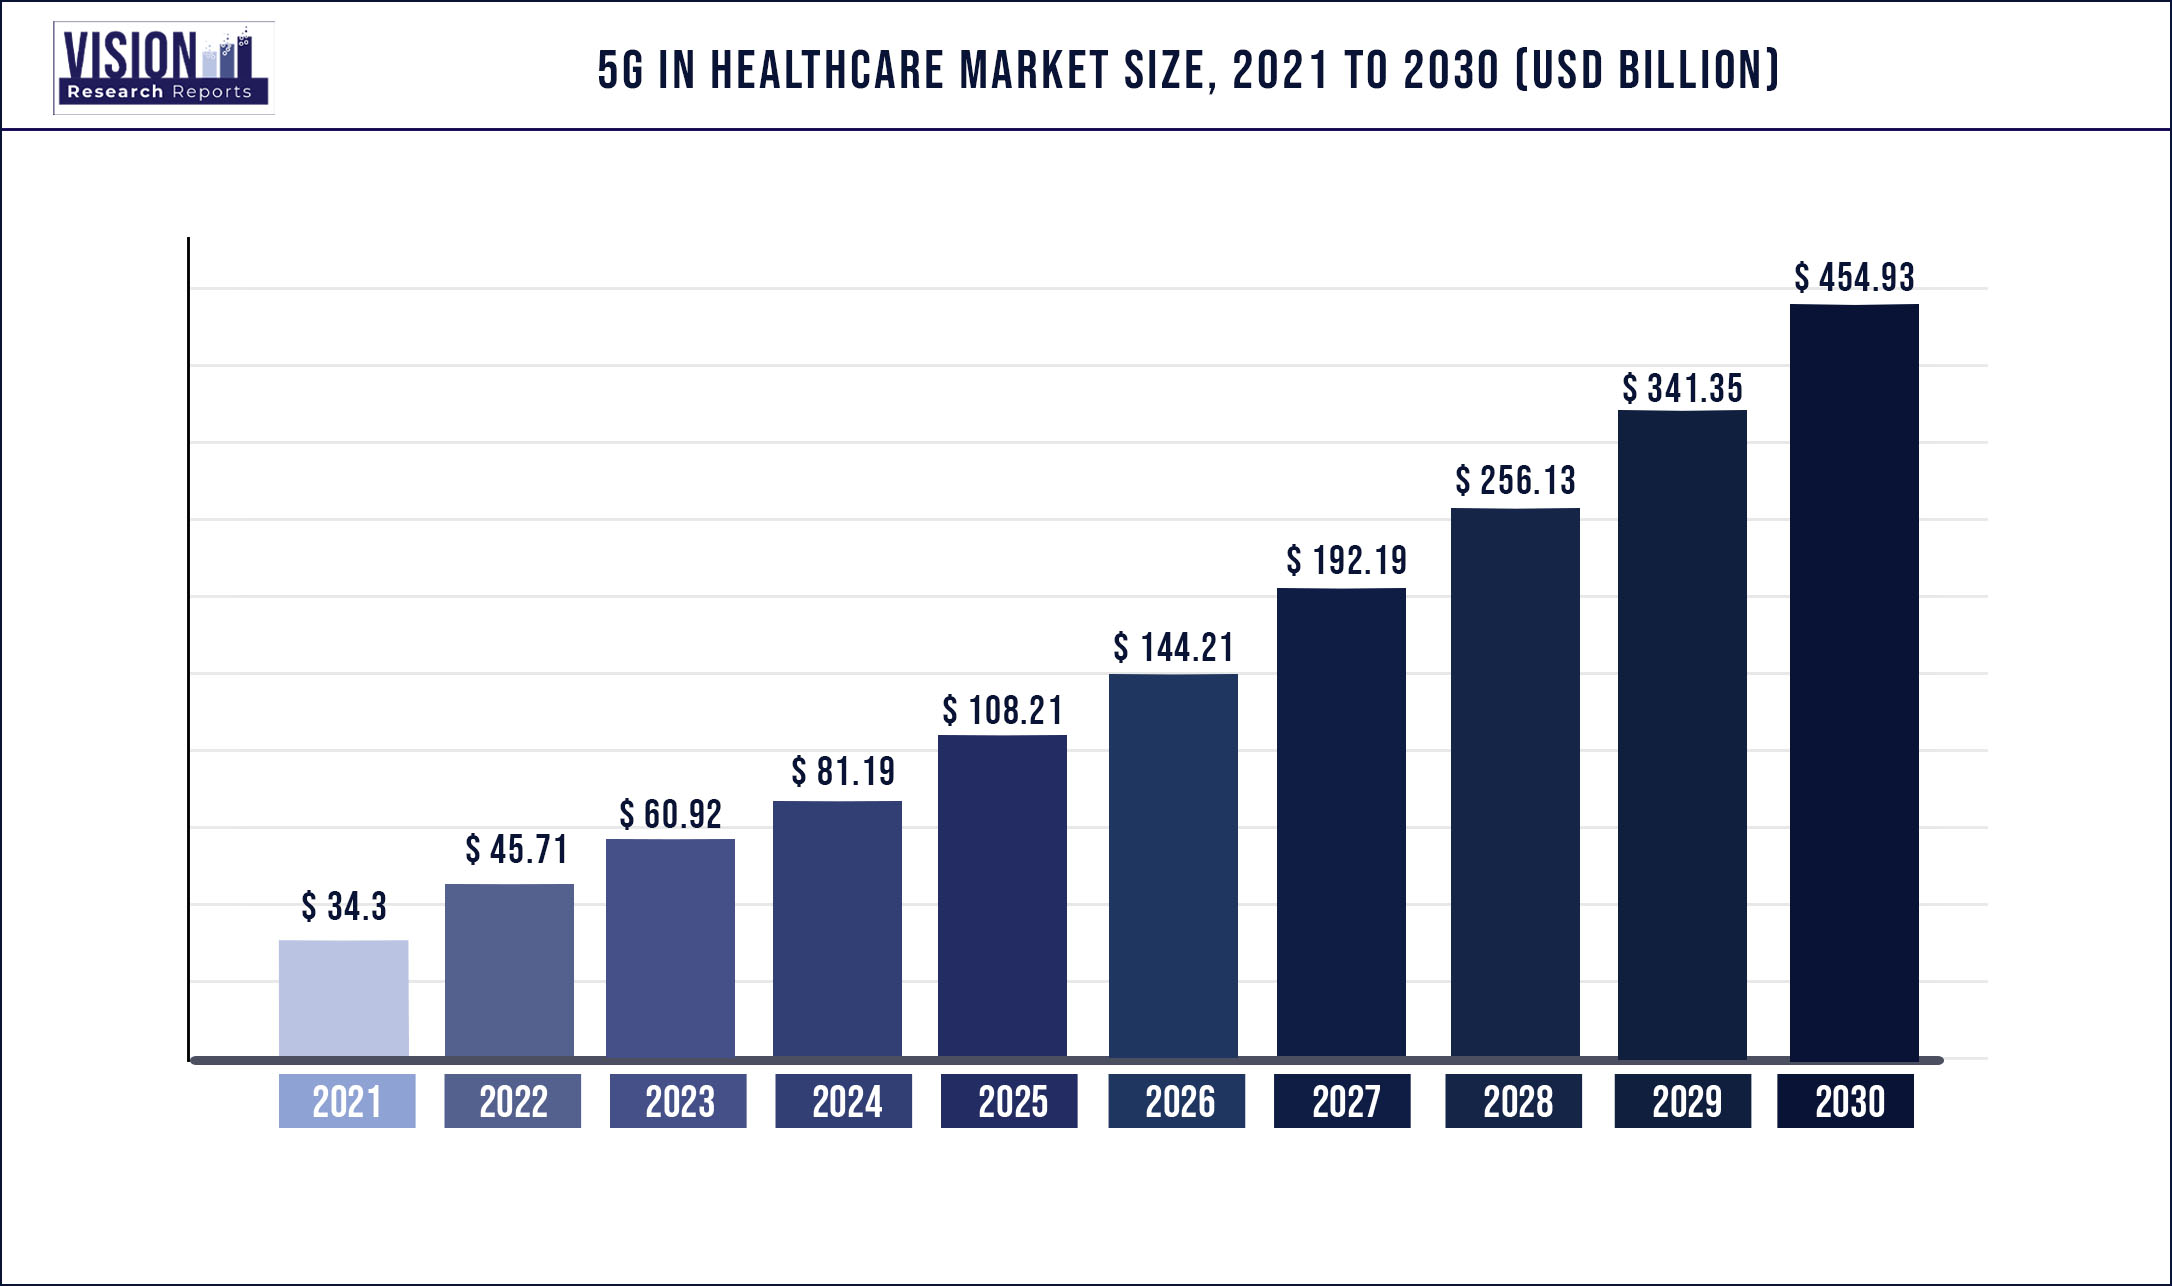 5G In Healthcare Market Size 2021 to 2030